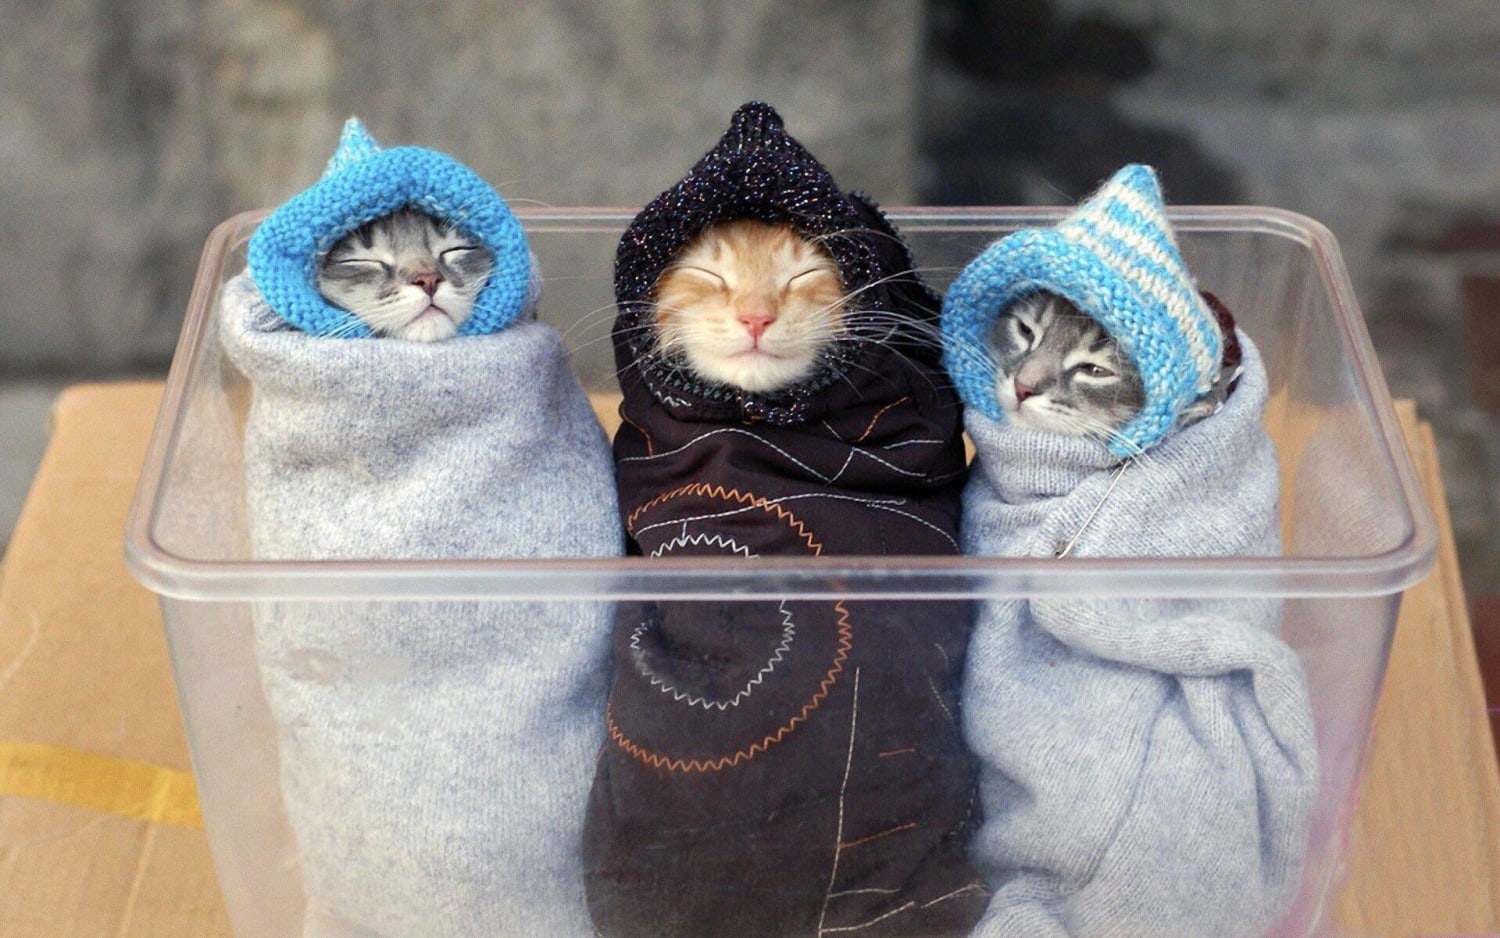 PsBattle: These wrapped up kittens